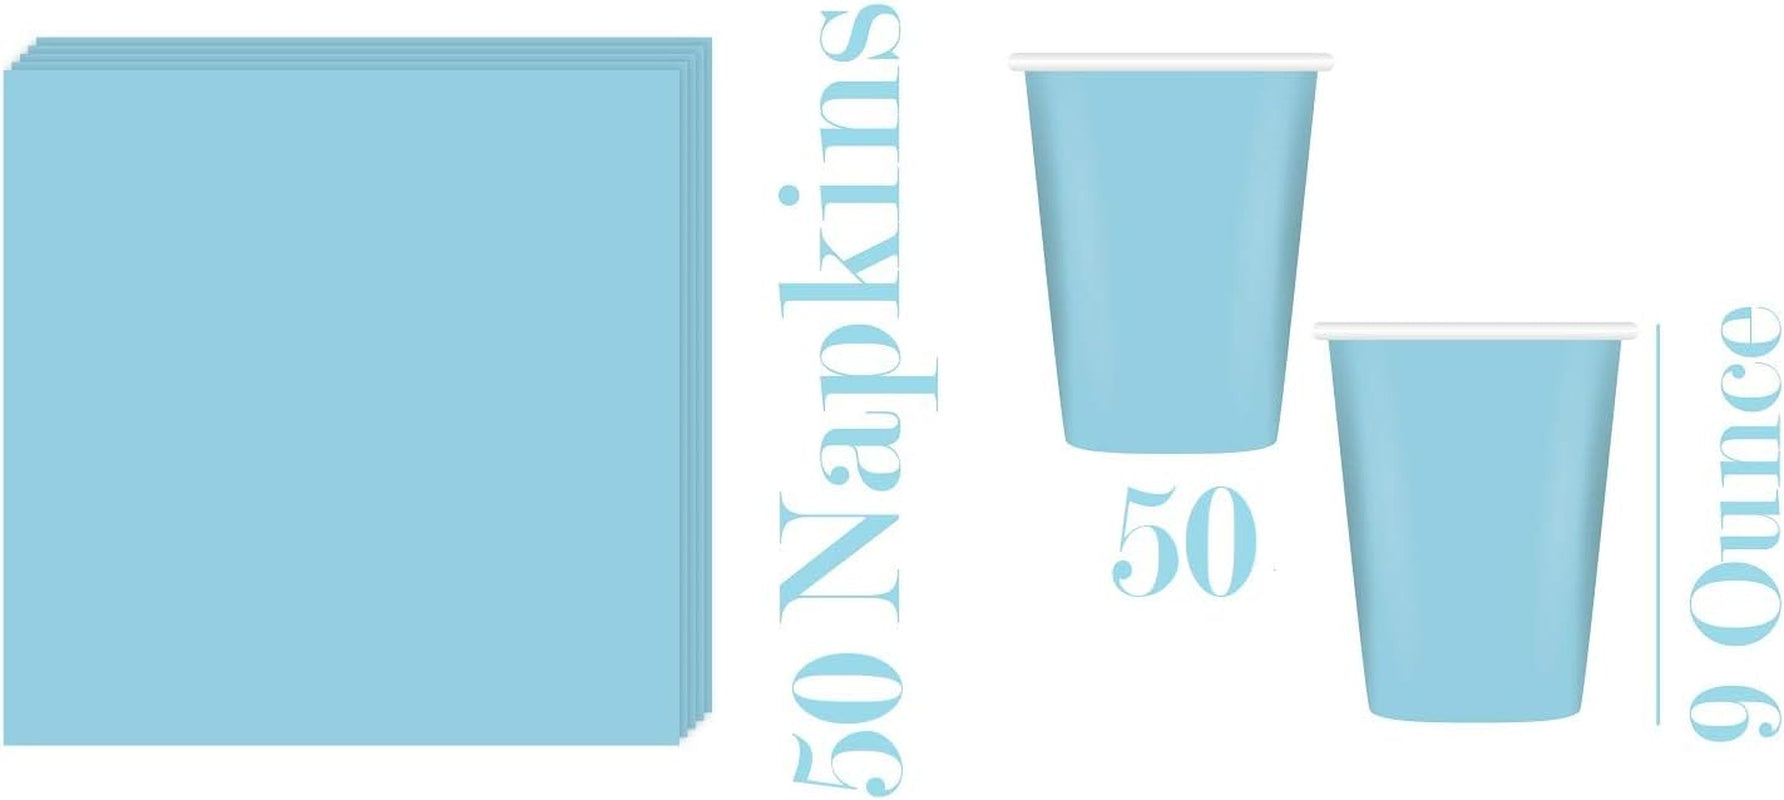 50-Person Party Pack - Disposable Plates, Cups, and Napkins in Light Blue